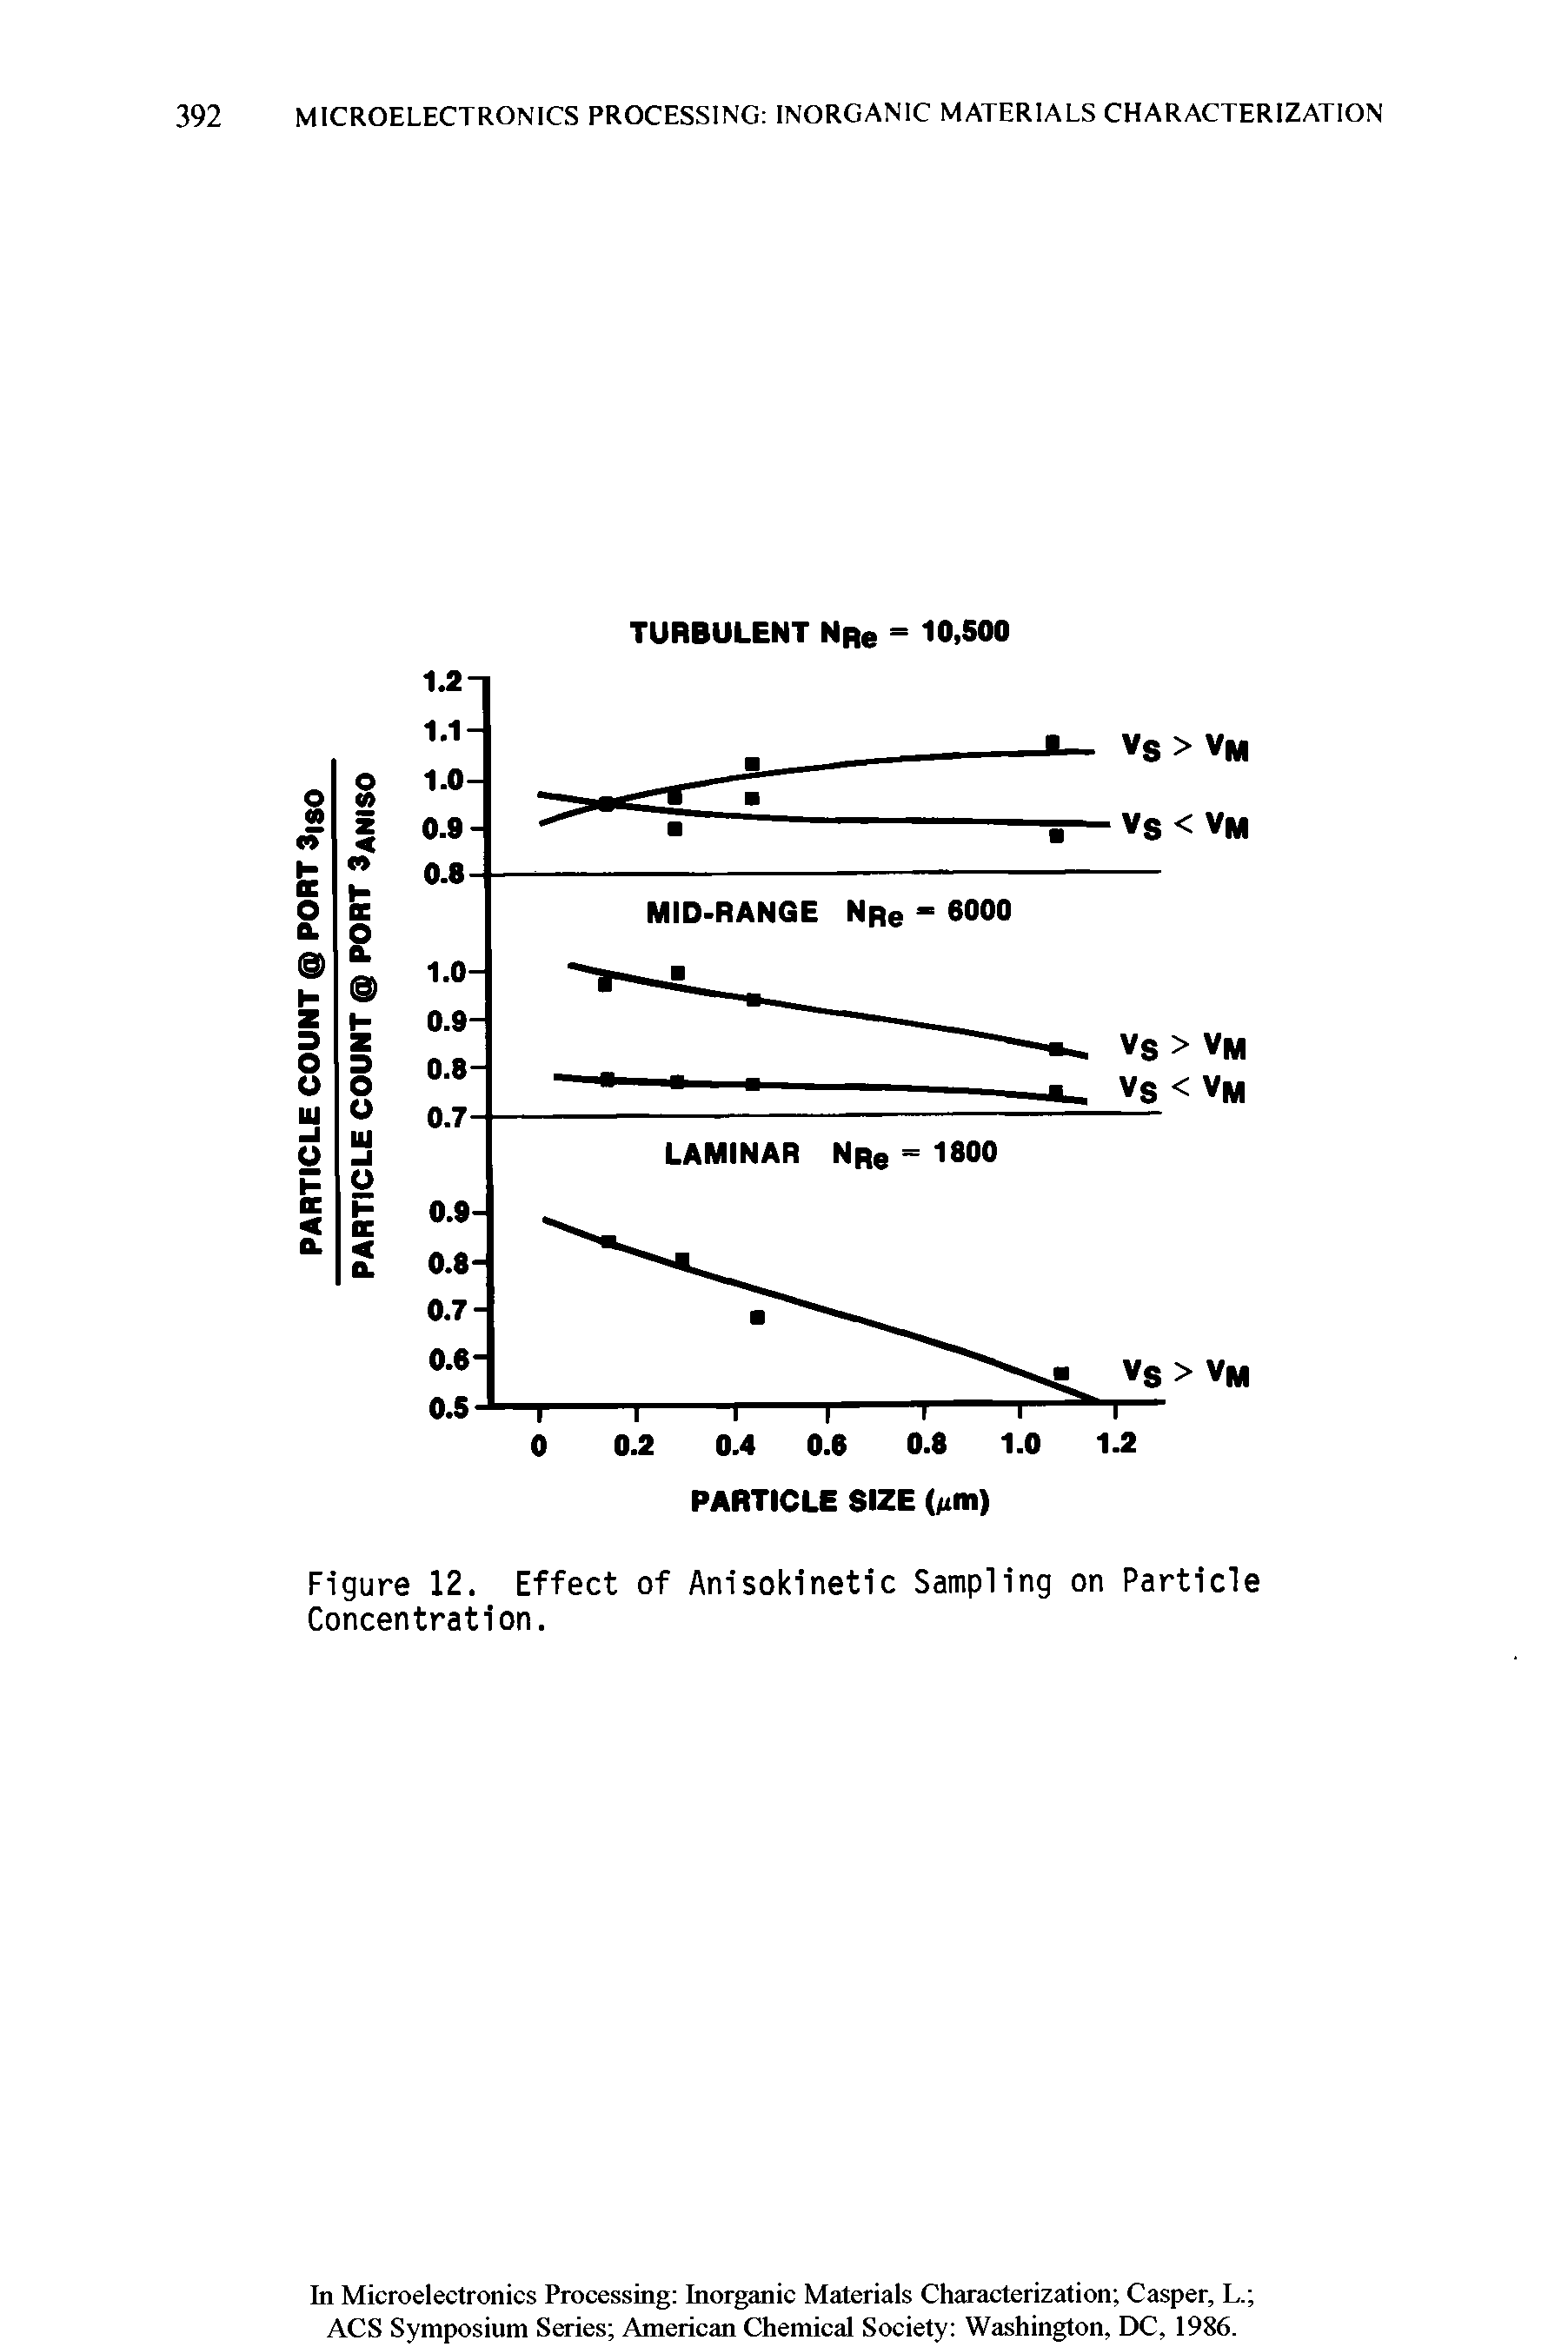 Figure 12. Effect of Anisokinetic Sampling on Particle Concentration.